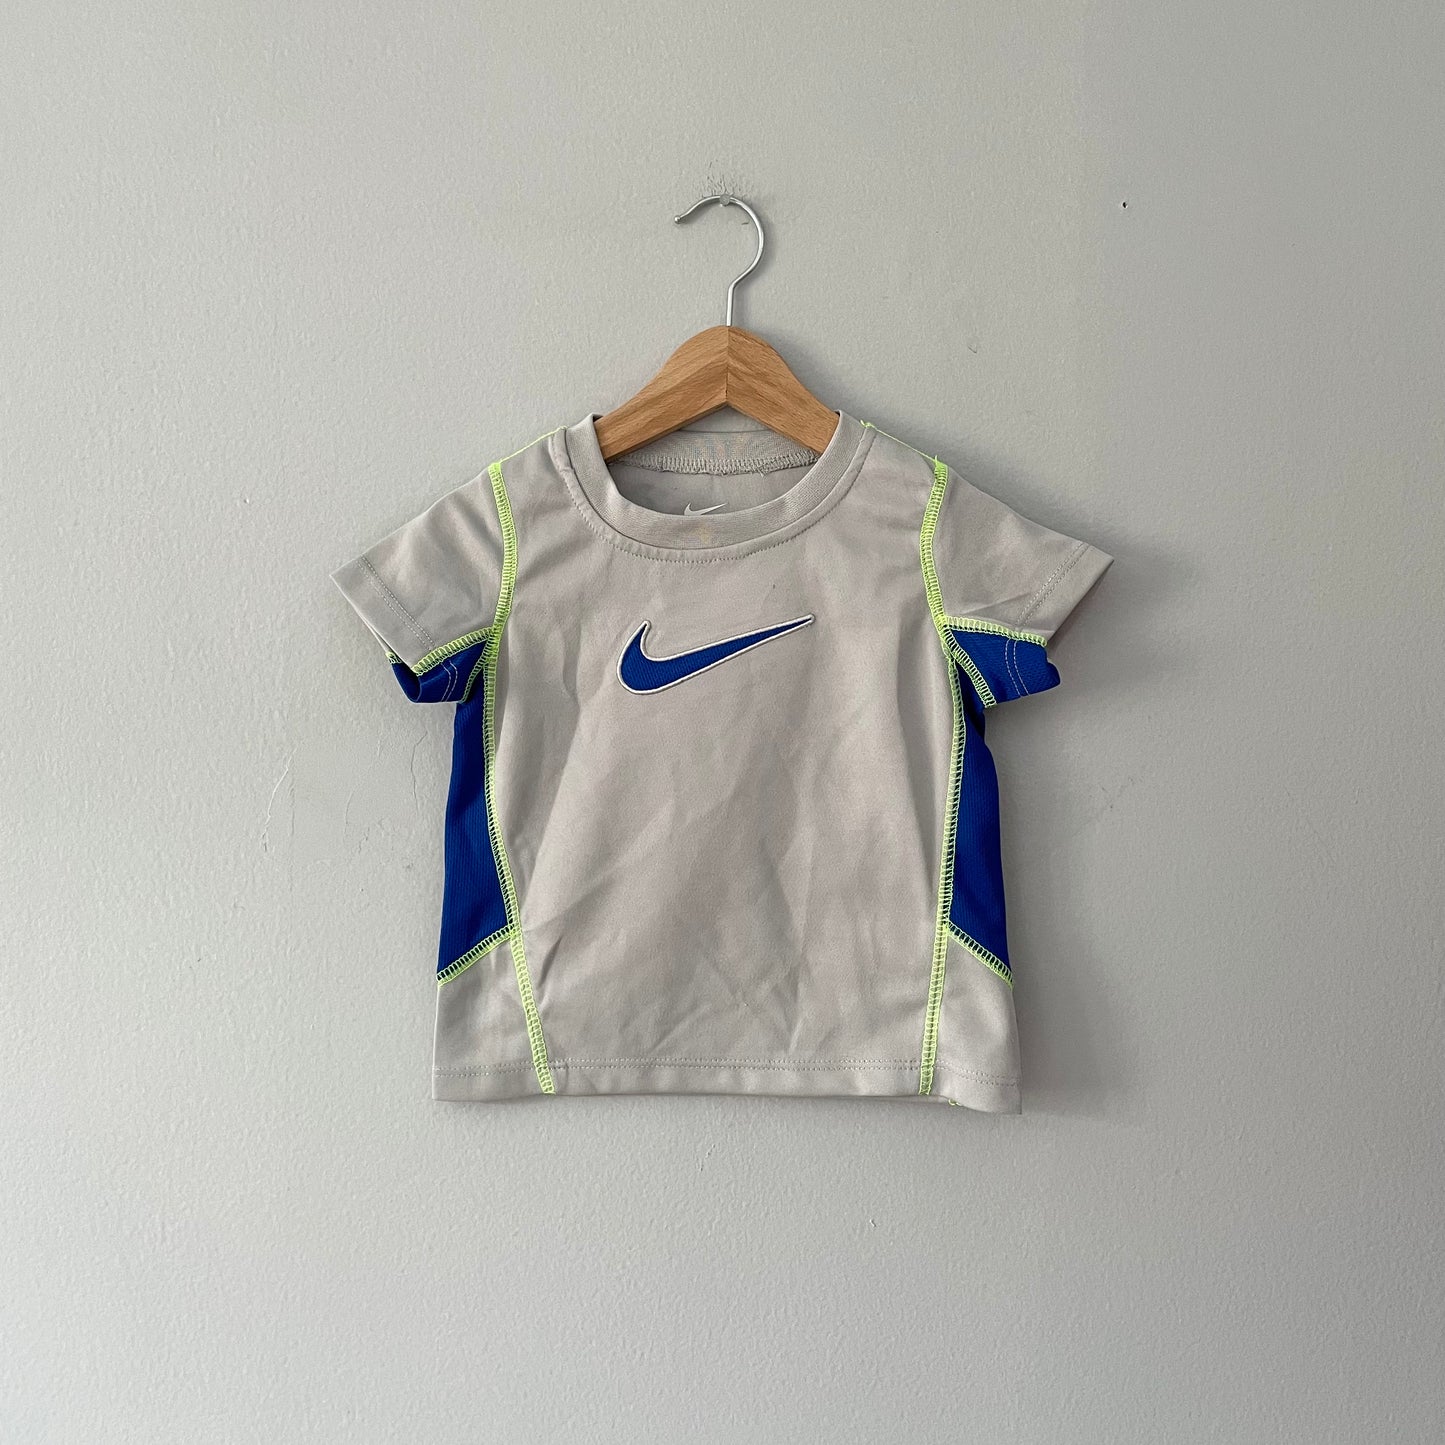 Nike / Active top / 12M